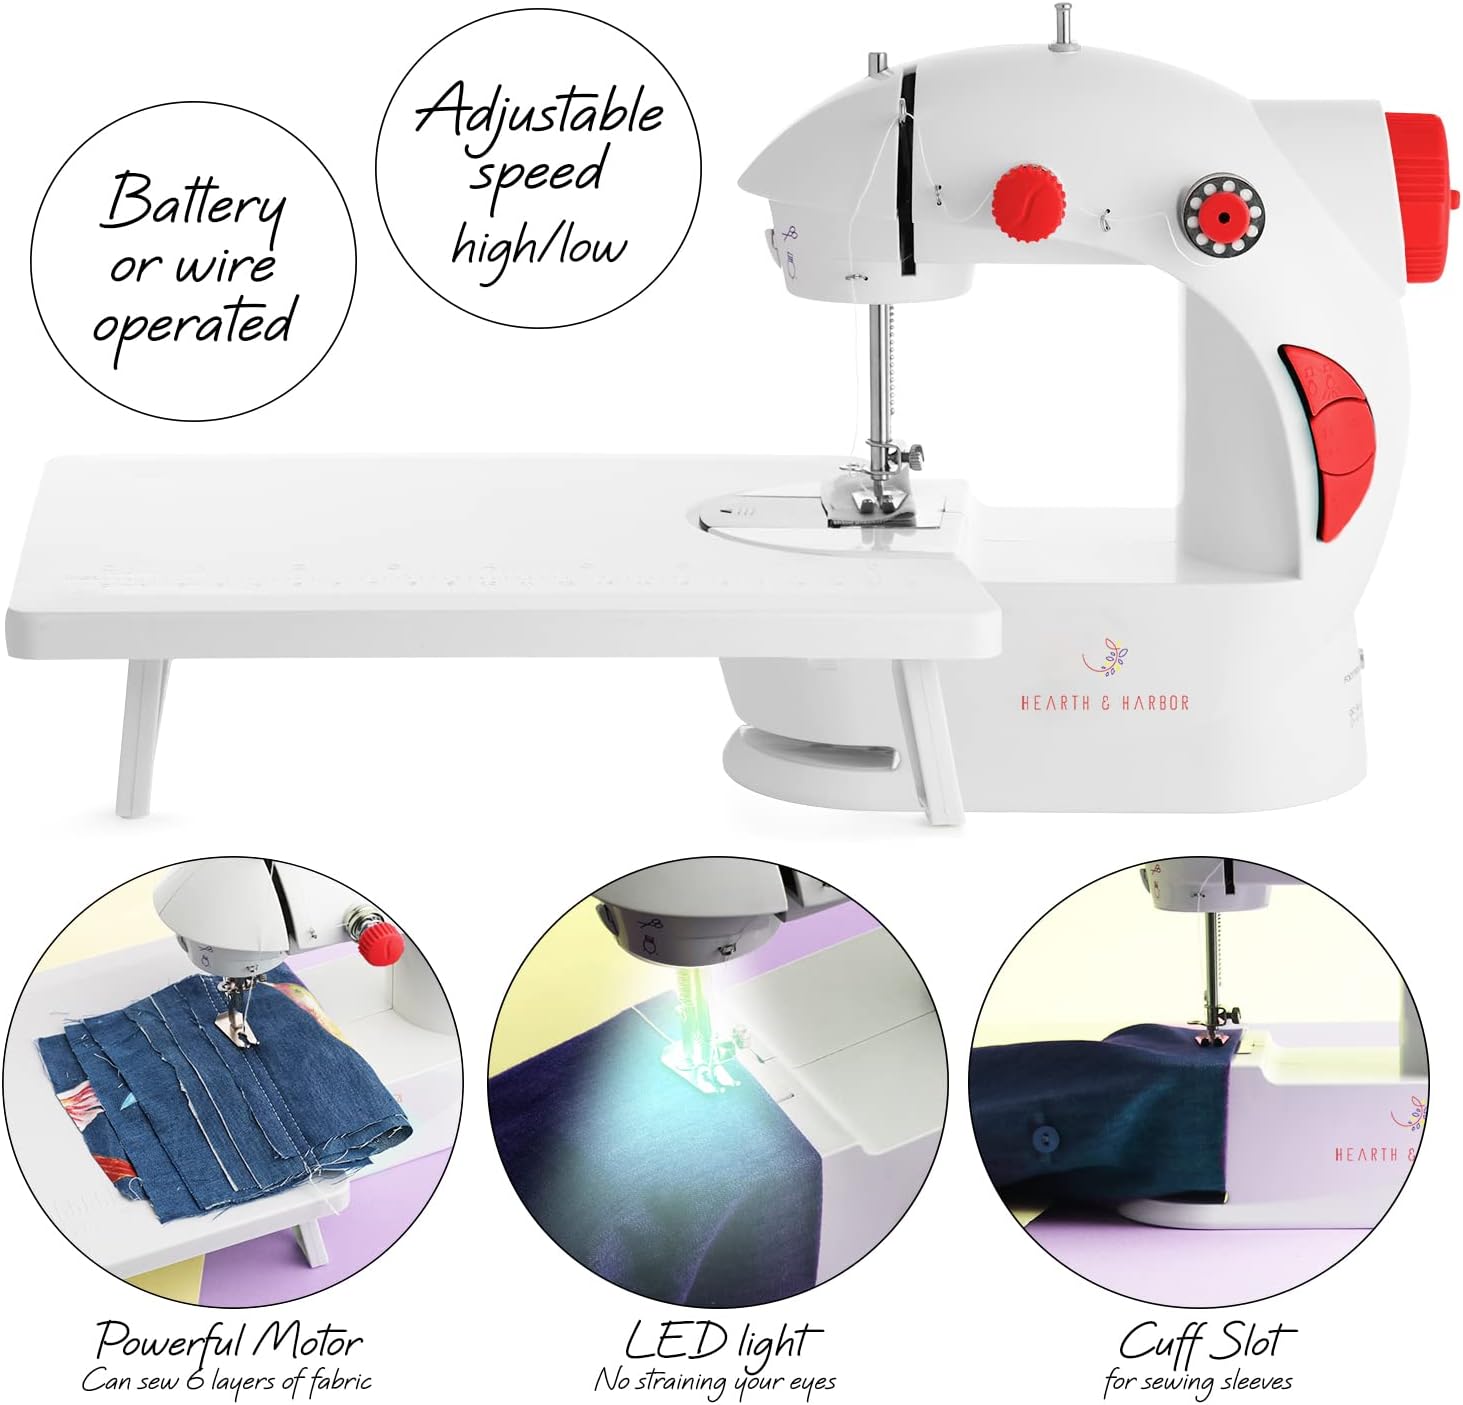 Hearth & Harbor Mini Sewing Machine for Beginners Adult, 48-Piece Portable Sewing Machine, Dual Speed Small Sewing Machine, Adults and Kids Sewing